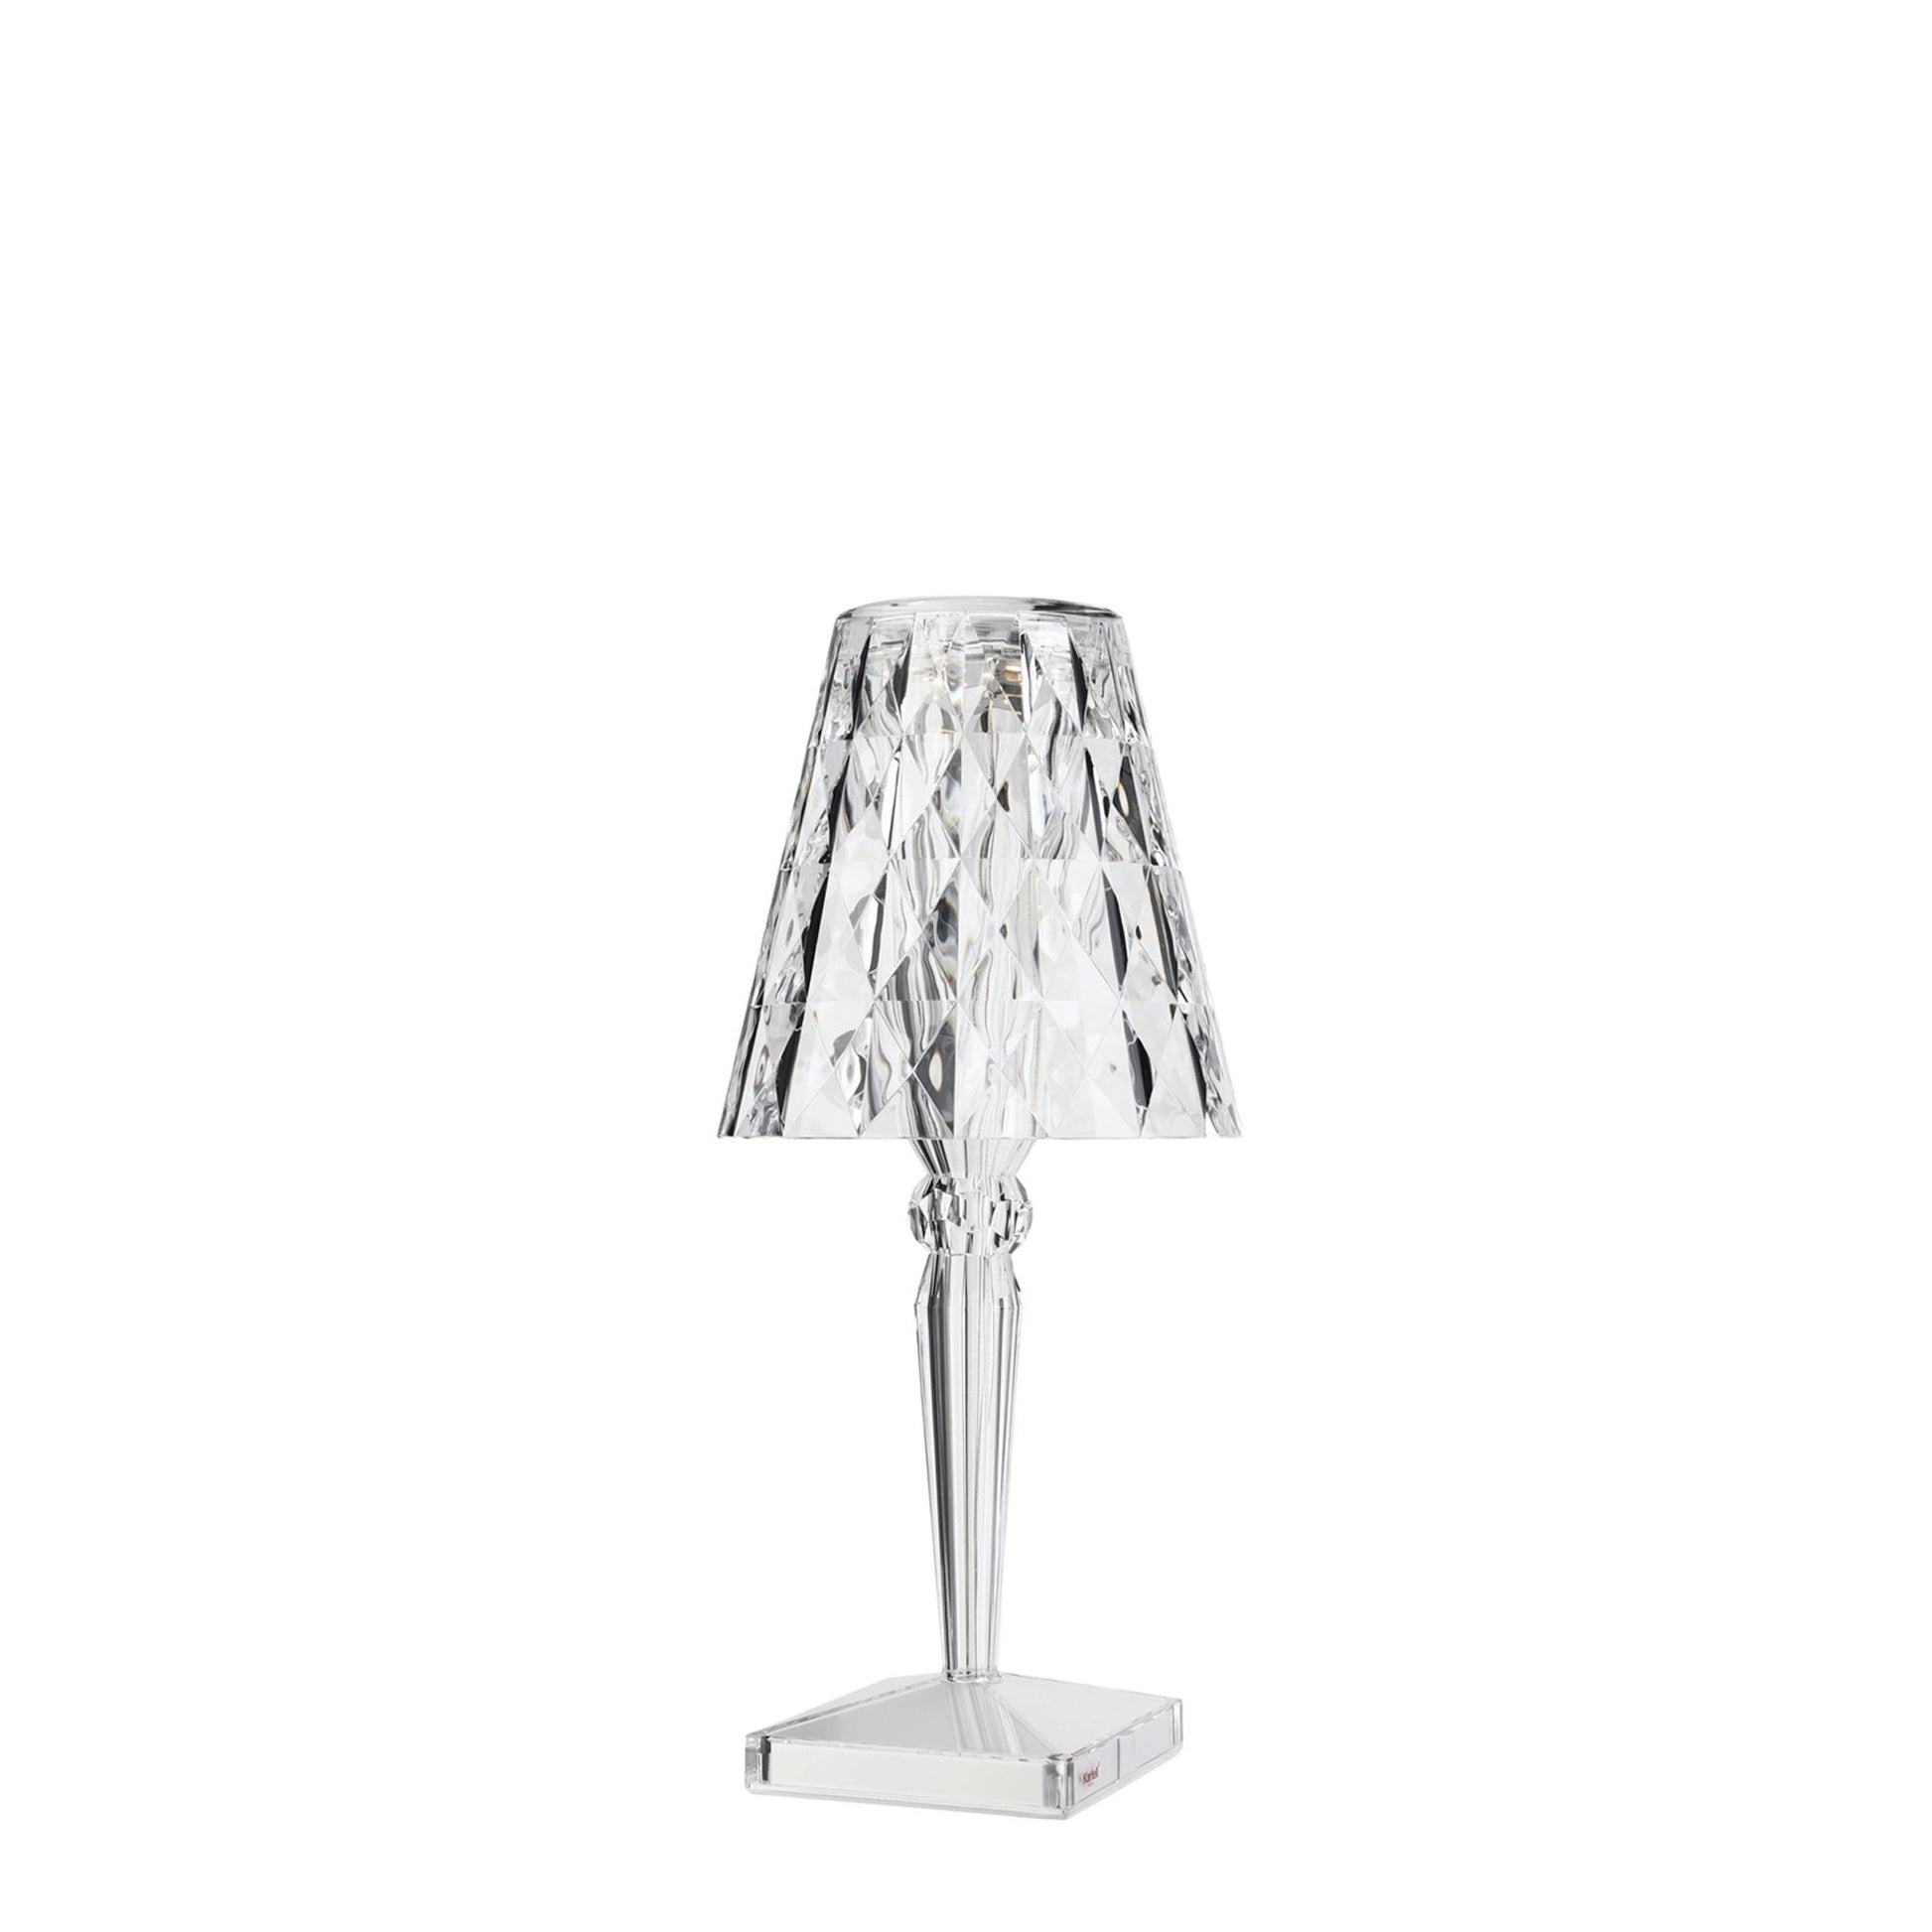 Big Battery Table Lamp by Kartell #Crystal